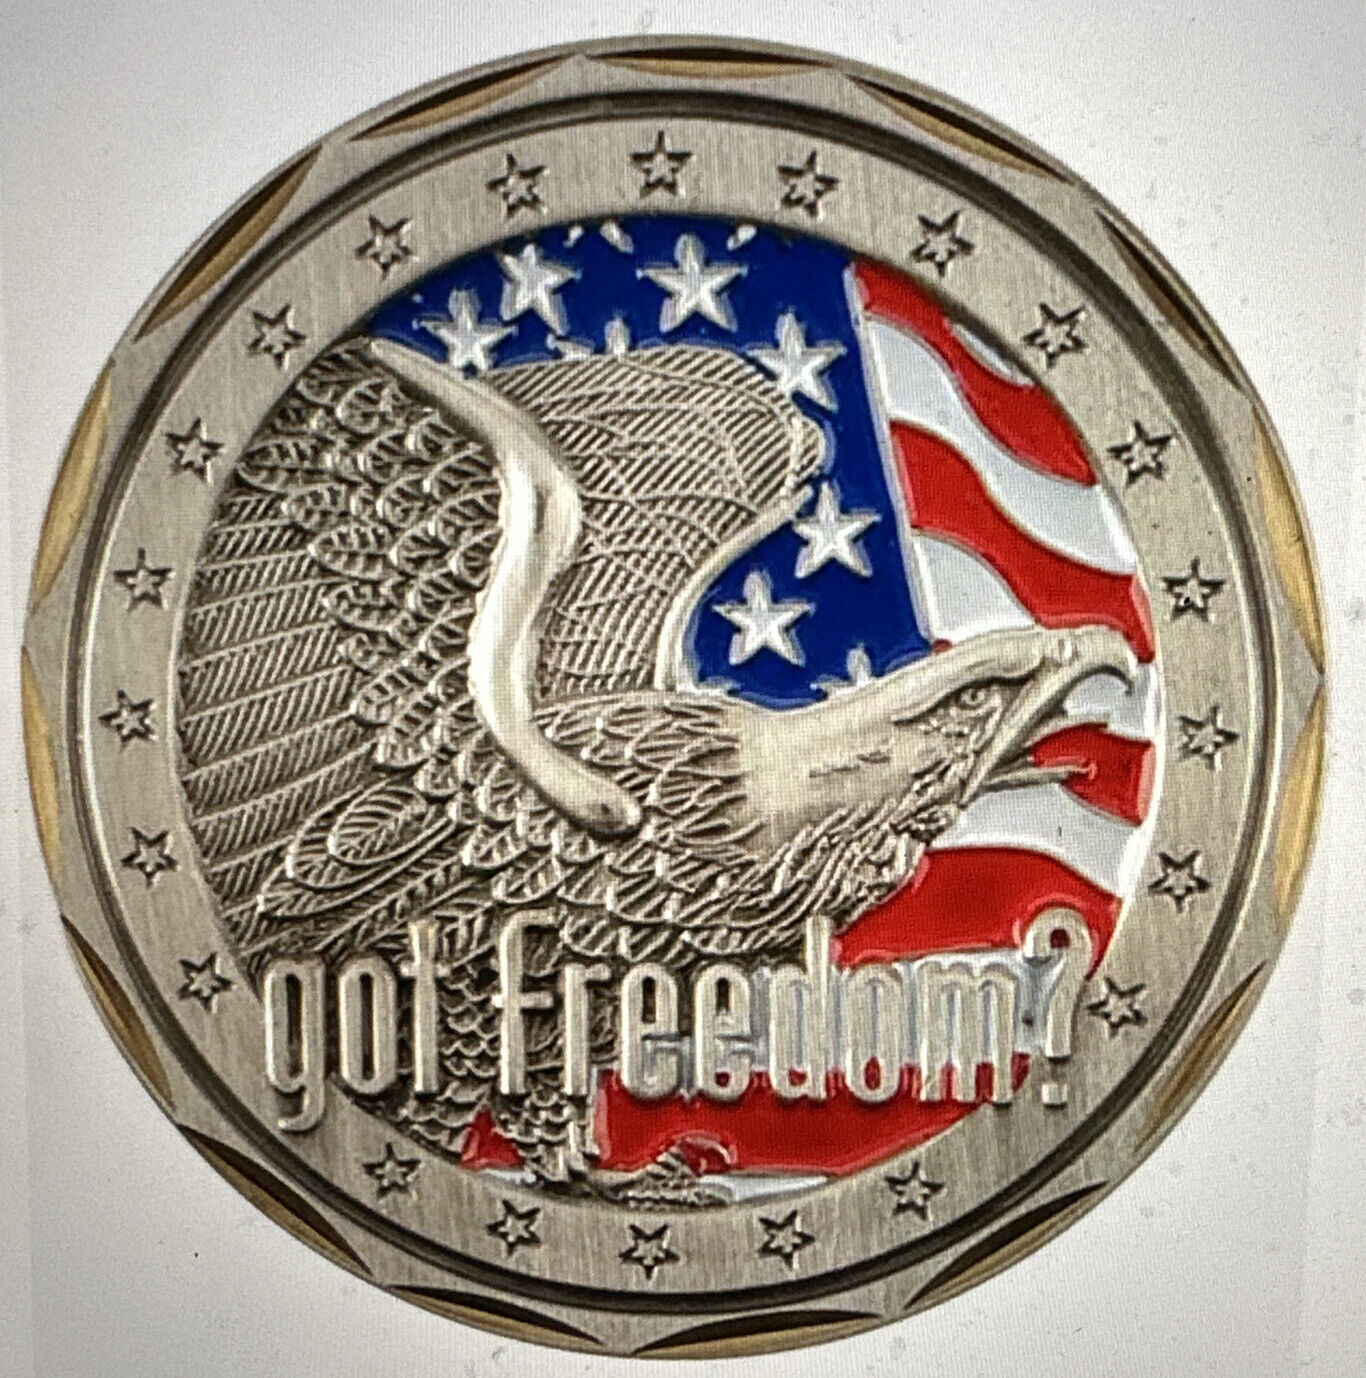 NEW United States US got freedom Air Force Challenge Coin Eagle Crest Style 2585